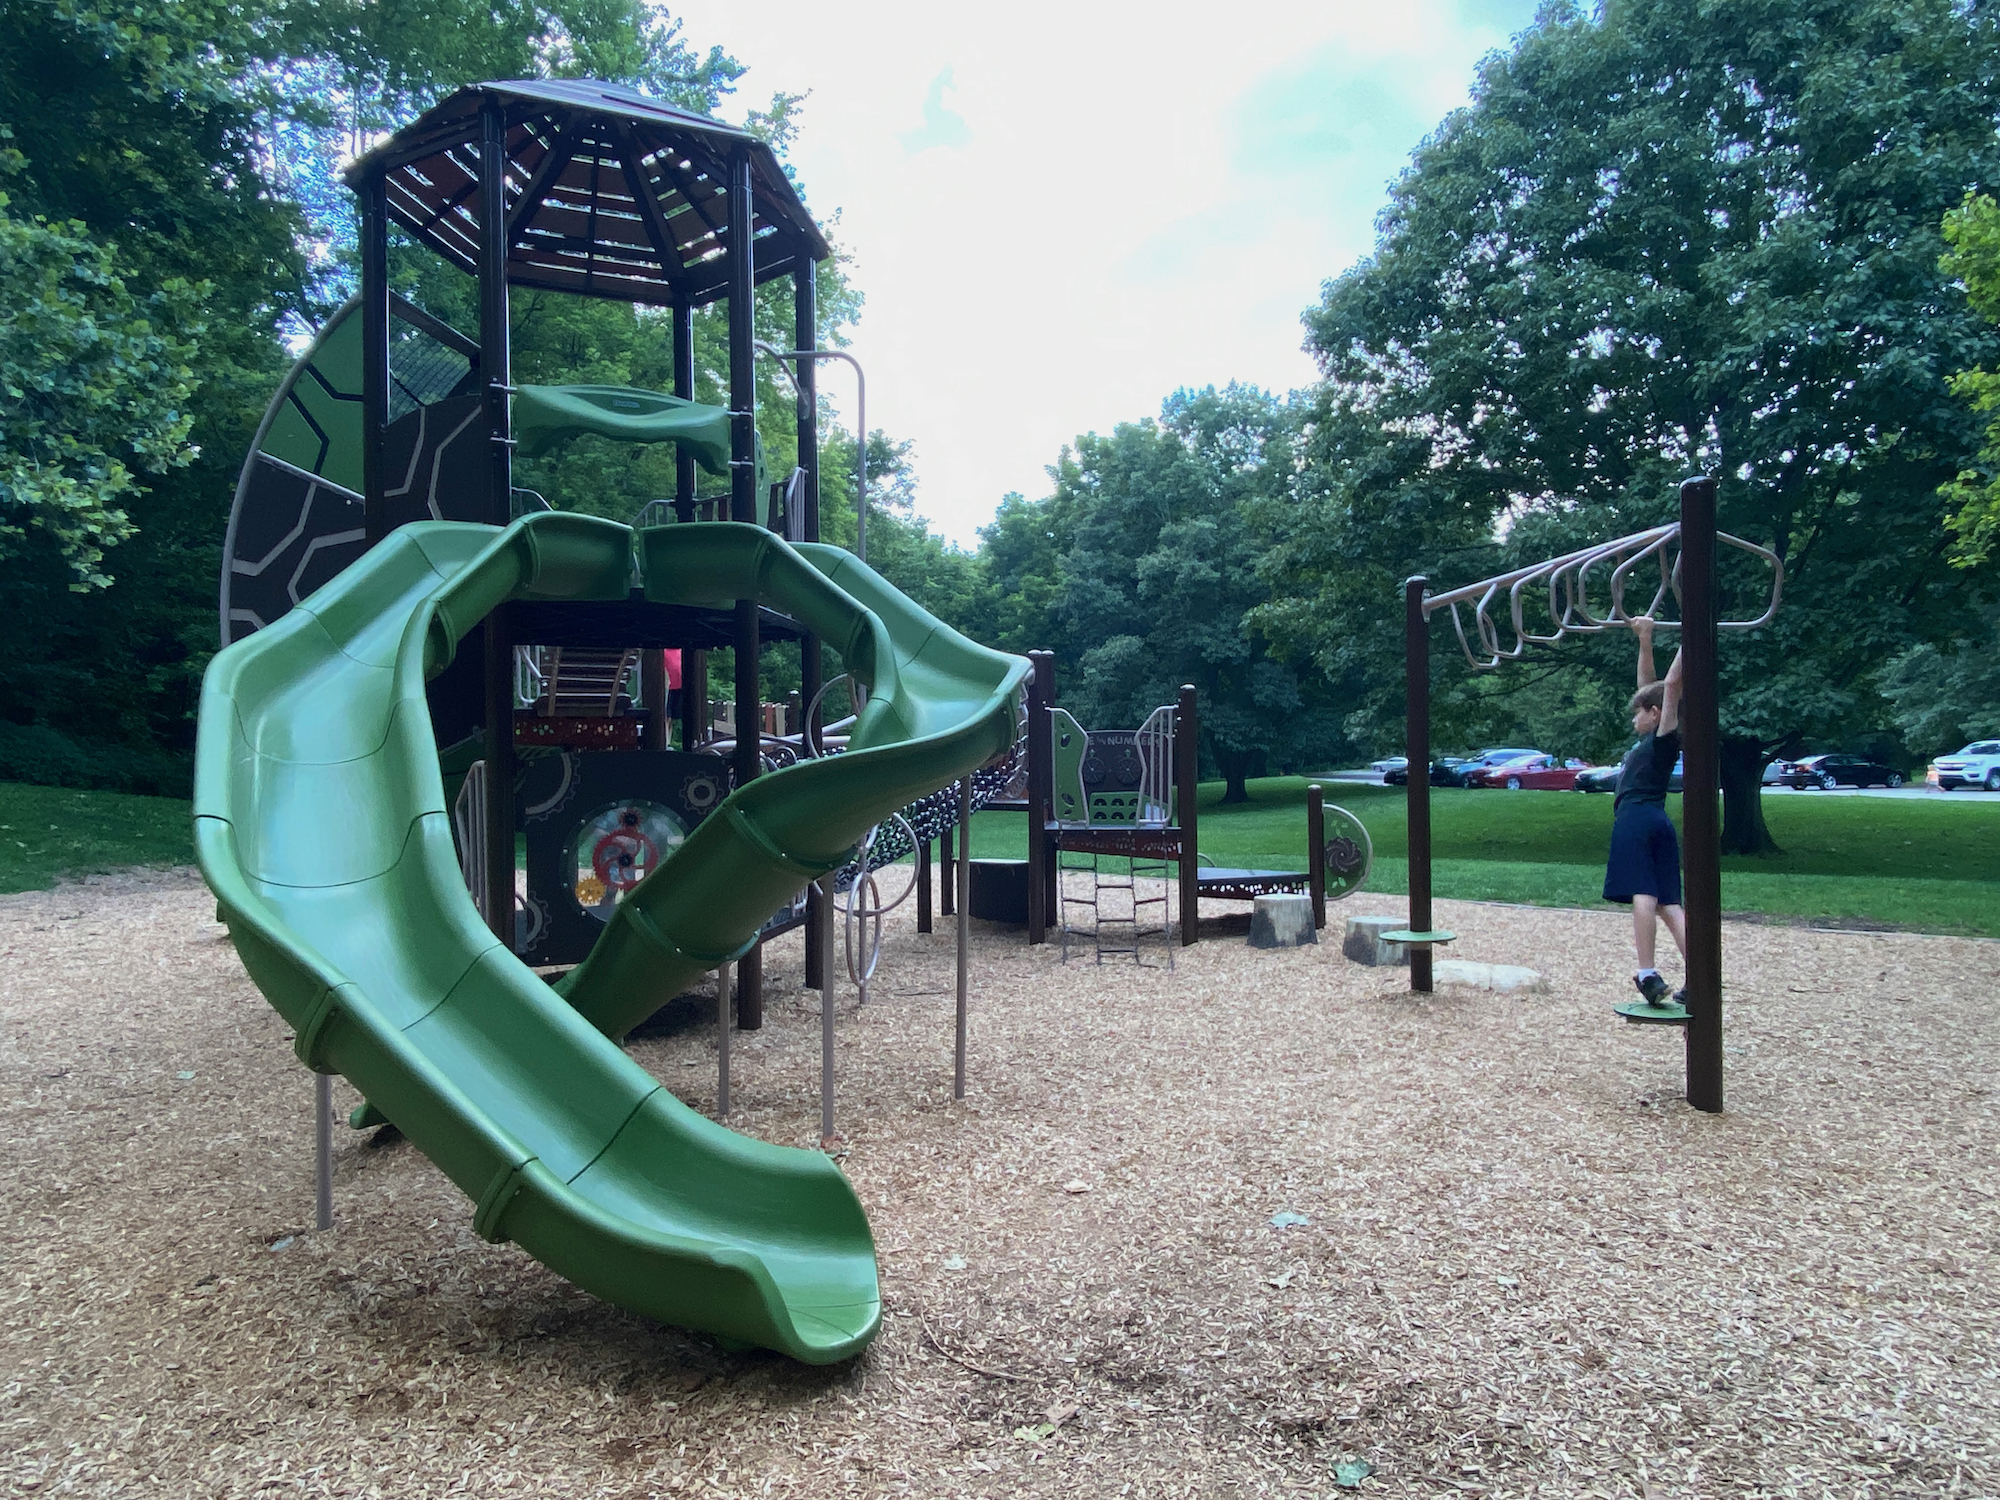 New Playground at Indian Ridge Area of Battelle Darby Creek Metro Park